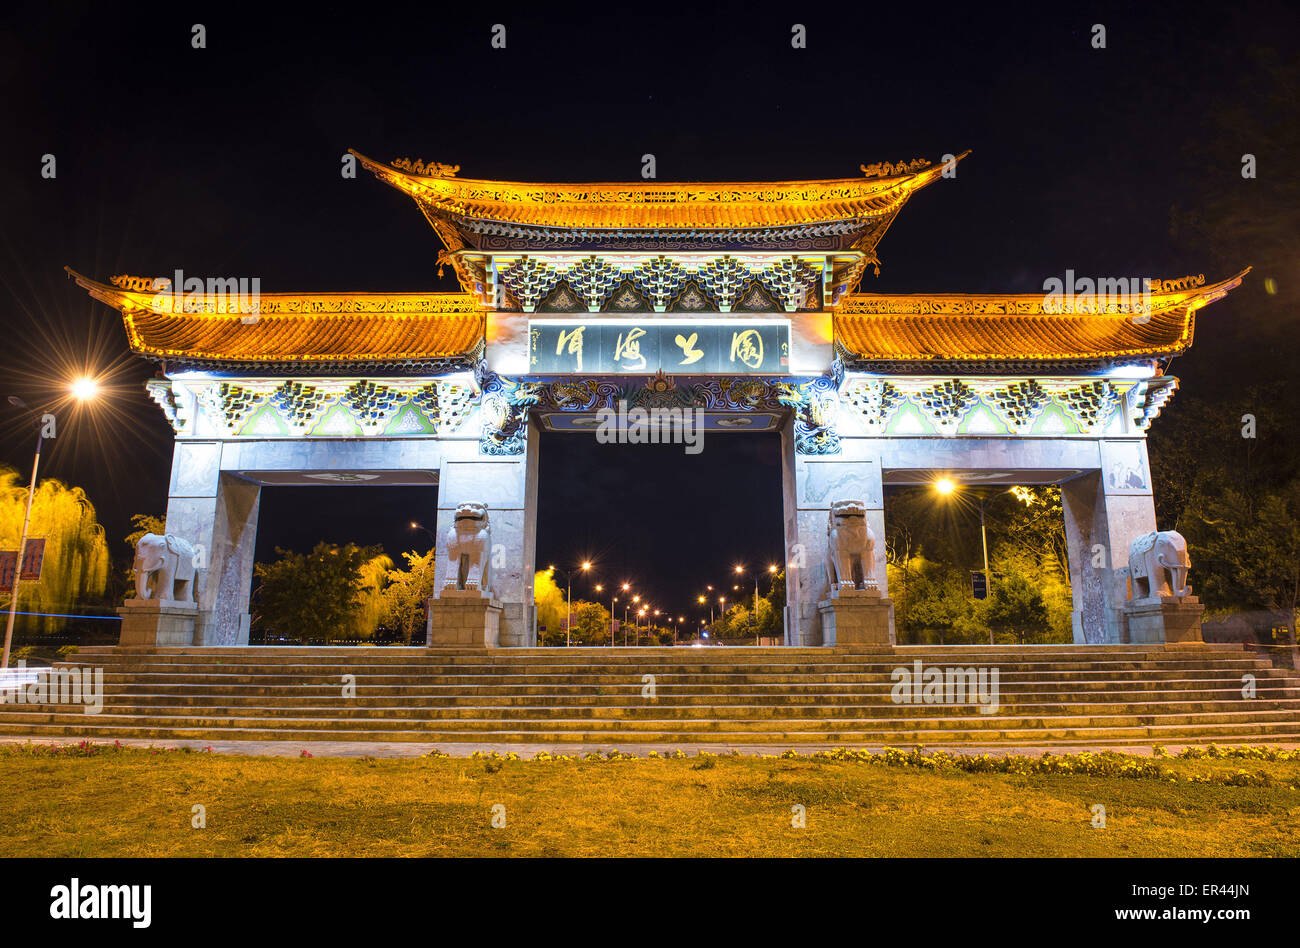 Dali, Yunnan, CHN. 5th Jan, 2015. Dali, CHINA - Jan 09 2015: (EDITORIAL USE ONLY. CHINA OUT) Gate of Erhai Lake Park. Erhai Lake is the largest highland lake next to Dianchi and one of the seven biggest fresh water lakes in China. ''Erhai'' means ''sea shaped like an ear'' in Chinese. Implying that the lake is ear shaped and as large as a sea, it was so named. The lake covers an area of 250 square kilometers and is located about 2 kilometers east of Dali. It is like a crescent lying between Cangshan and Dali city as seen from Cangshan Mount. In a sunny day, the crystal waters of Erhai Lake an Stock Photo